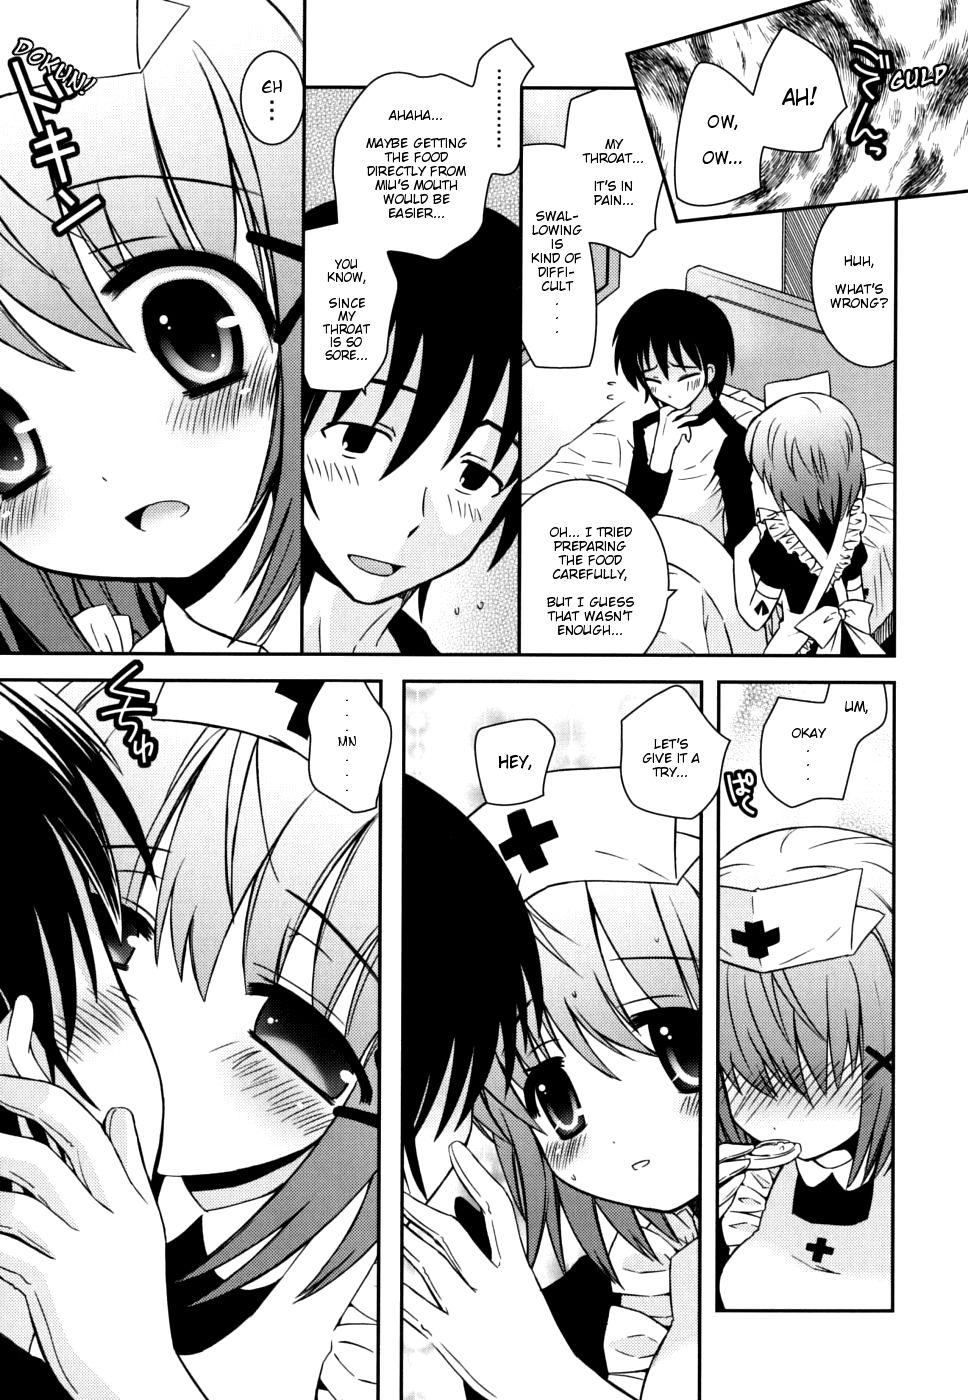 Amateur Blowjob Imouto Pandemic! - Younger sister Pandemic Uncensored - Page 5